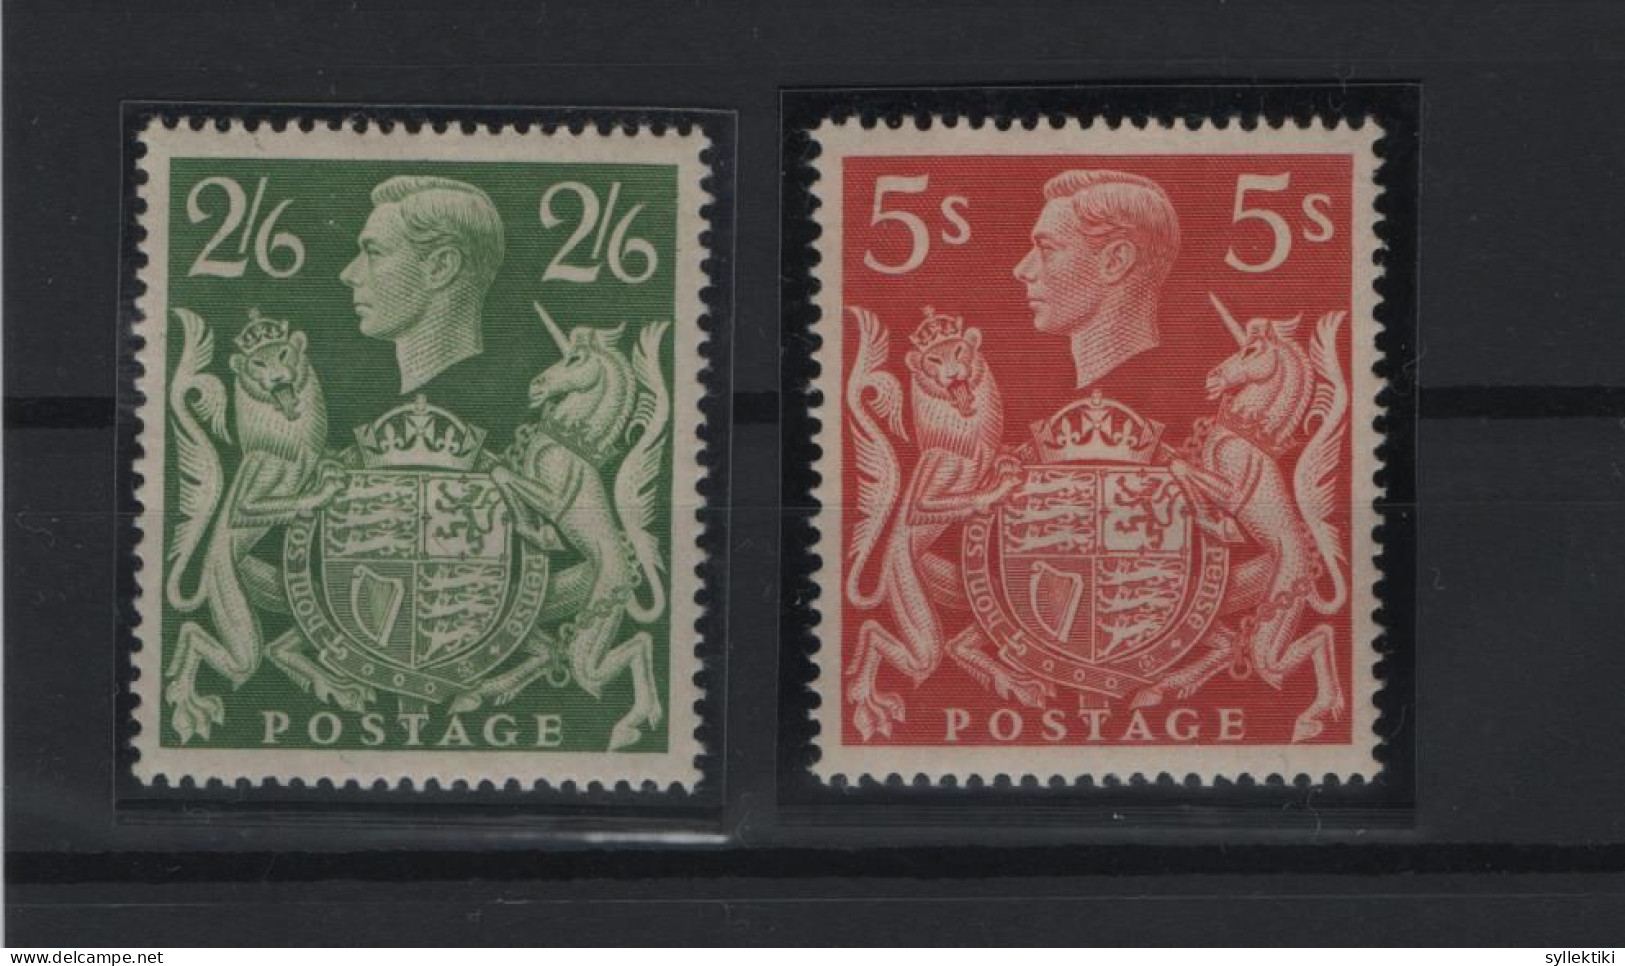 GREAT BRITAIN 1939 KGVI 2/6 & 5 SHILLINGS 2 DIFFERENT MNH STAMPS  STANLEY GIBBONS N 476b, 477  AND VALUE GBP 35.00 - Nuevos